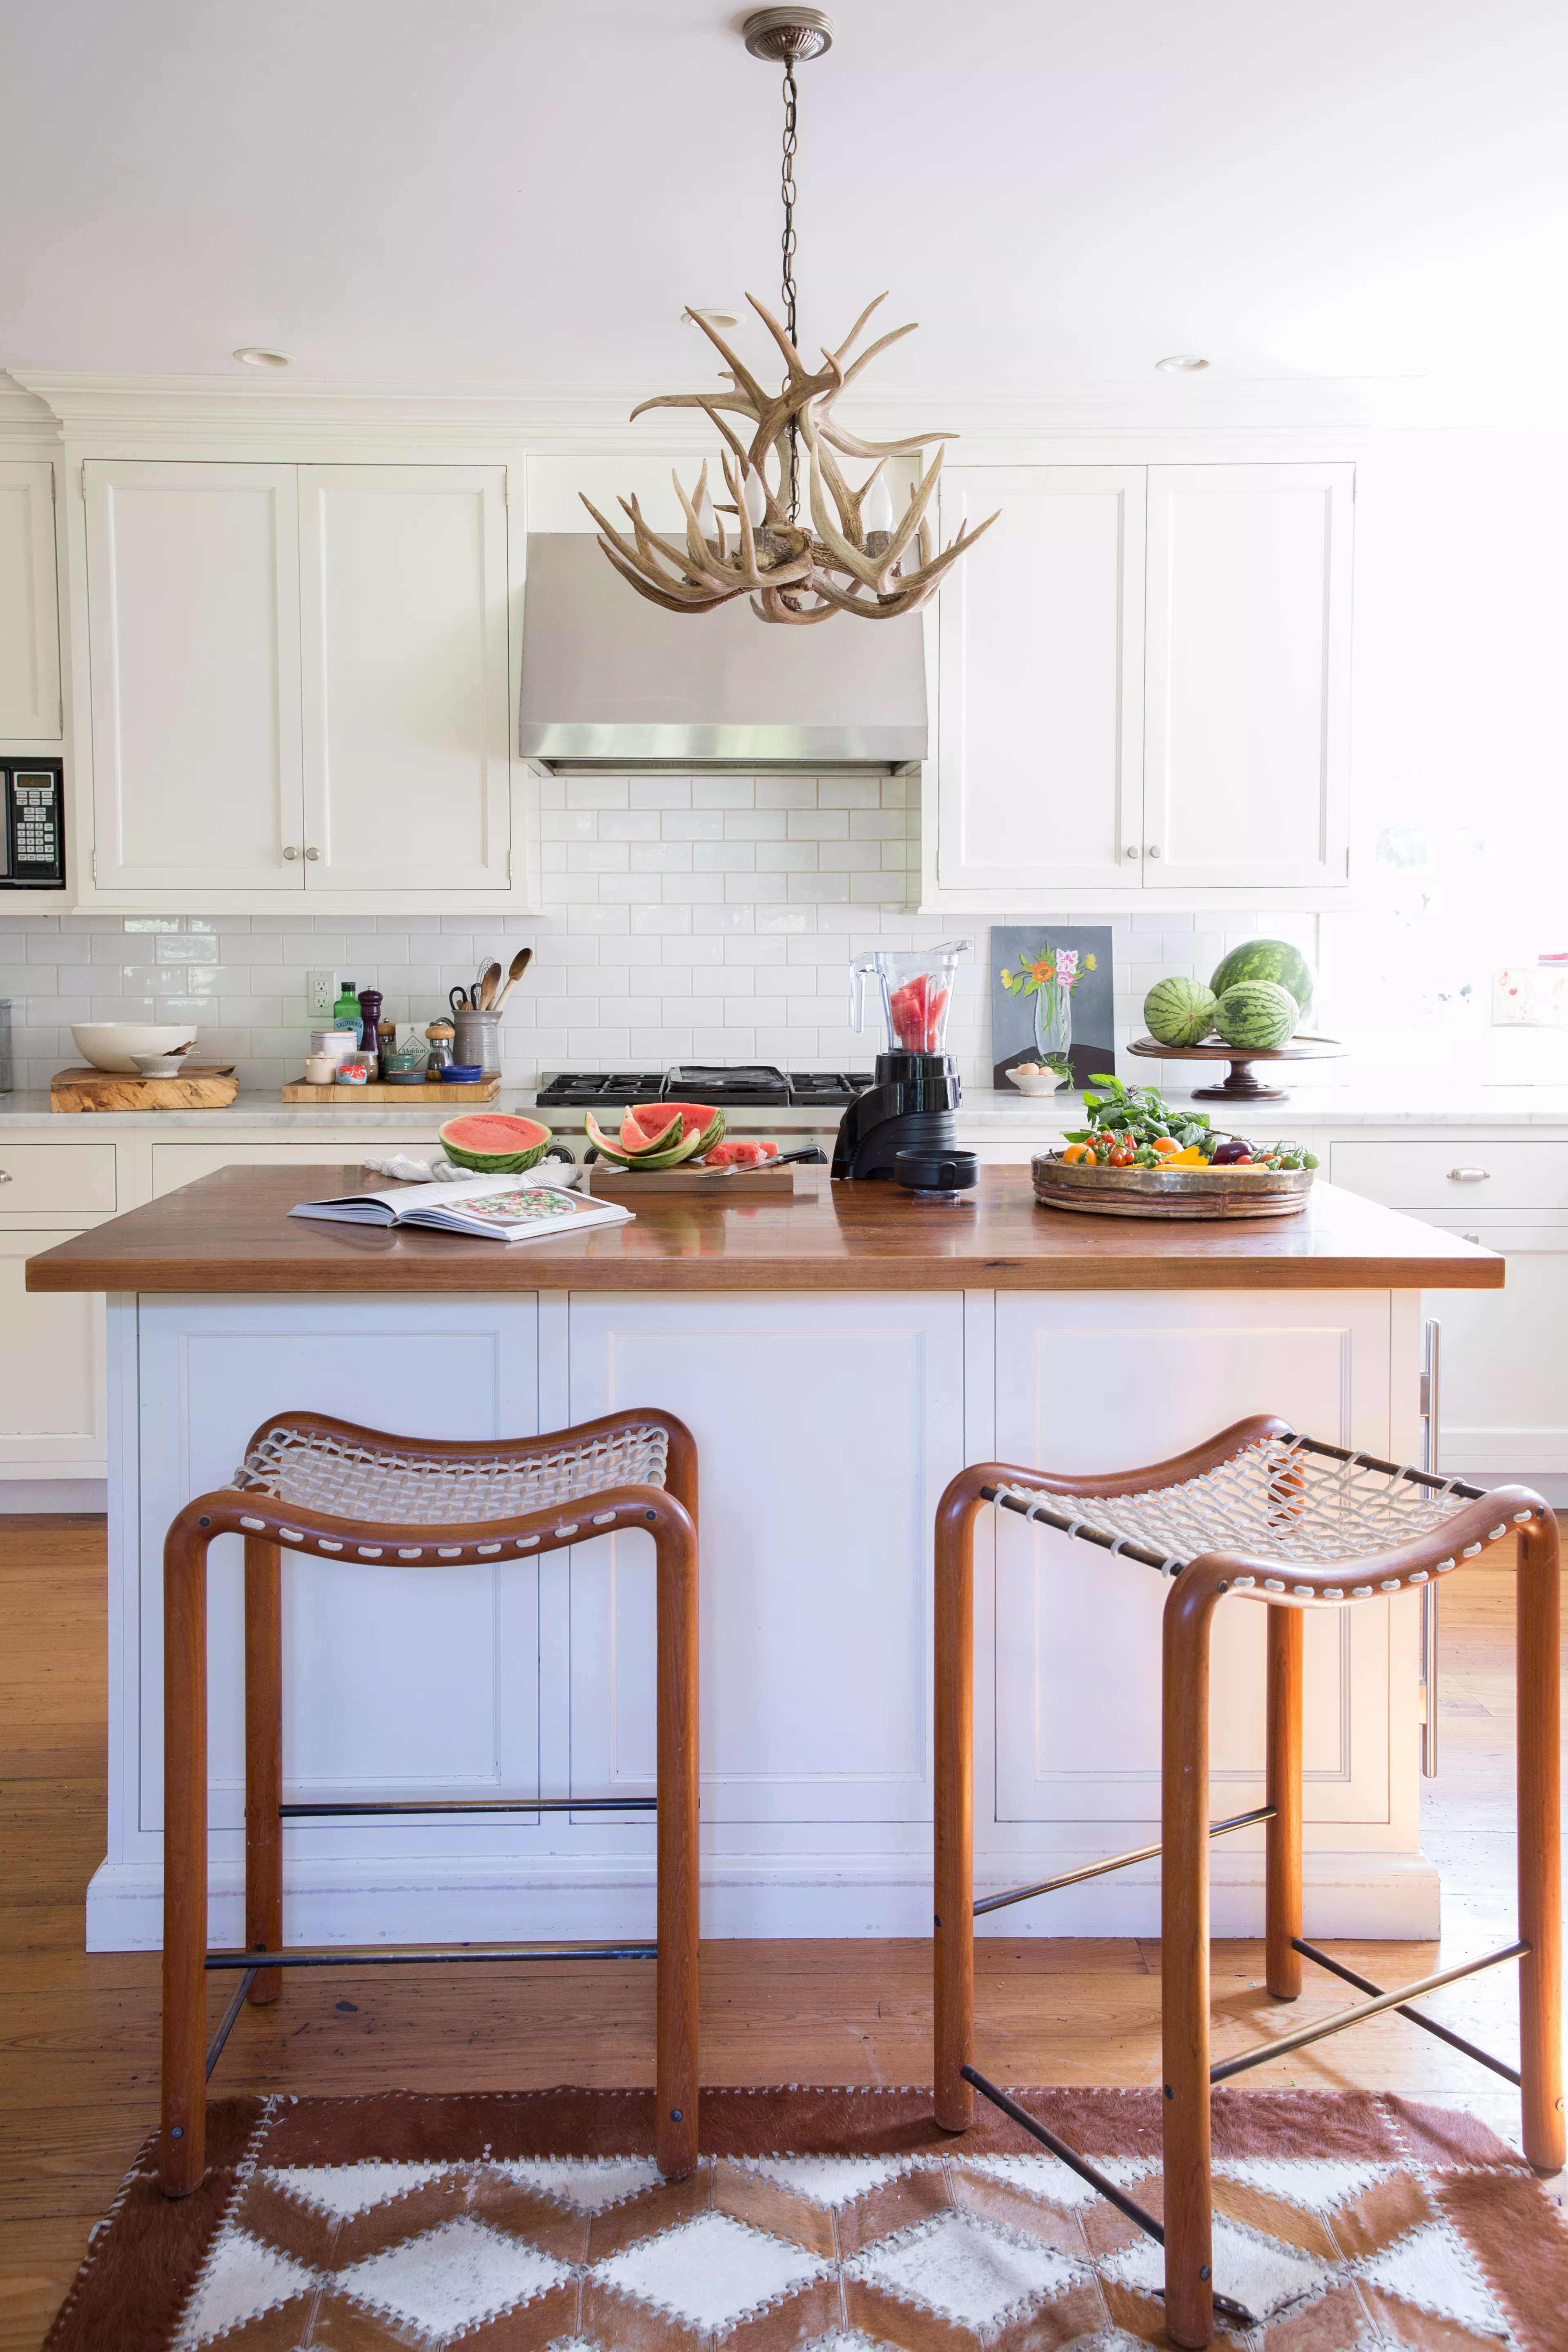 McGinnis white kitchen with walnut island, rope-seat stools and antler chandelier; Stools by kitchen island